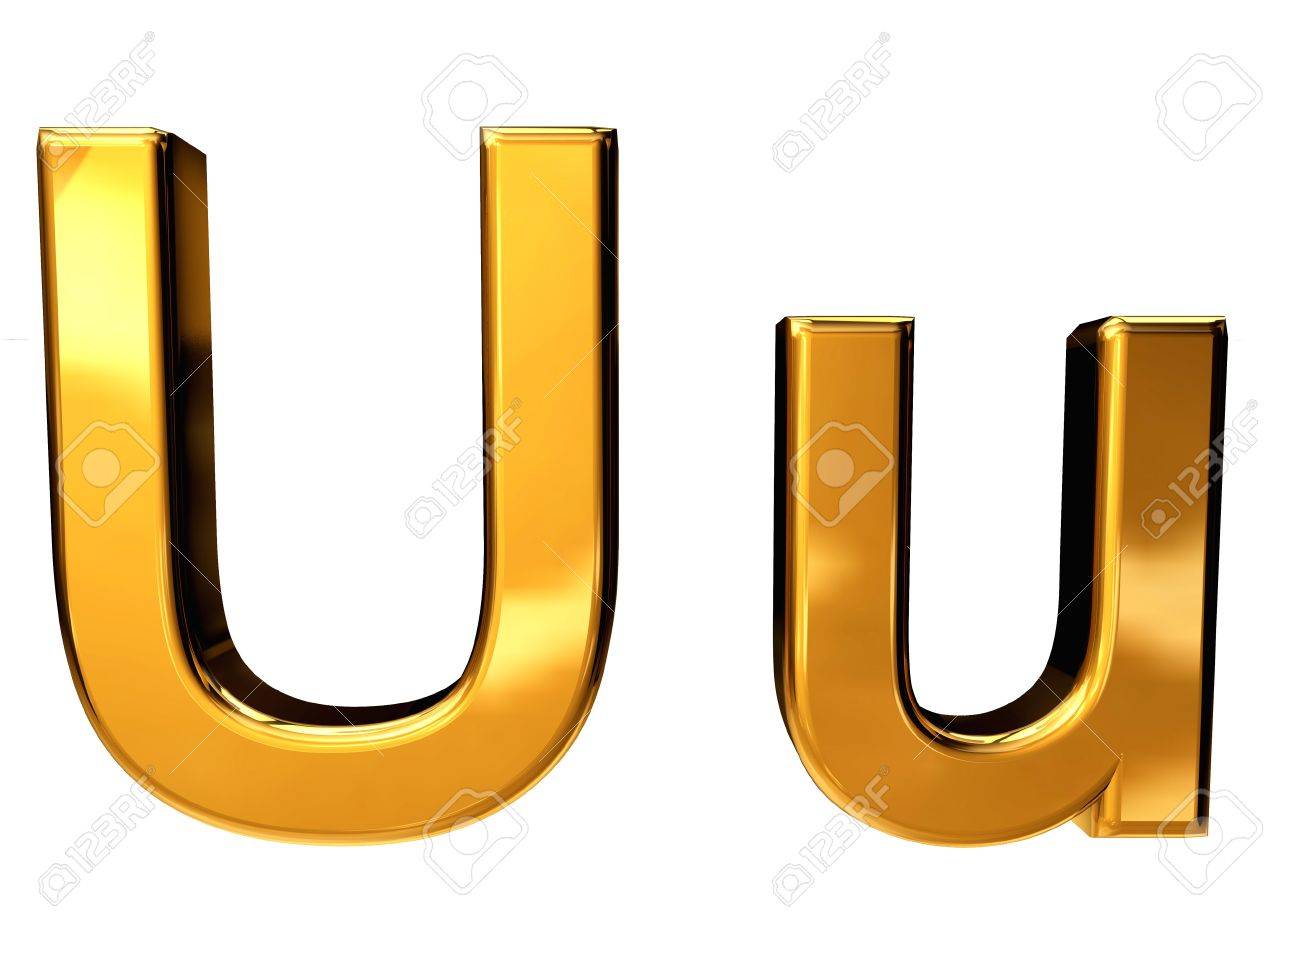 free-download-gold-letter-u-upper-case-and-lower-case-isolated-on-white-1300x974-for-your